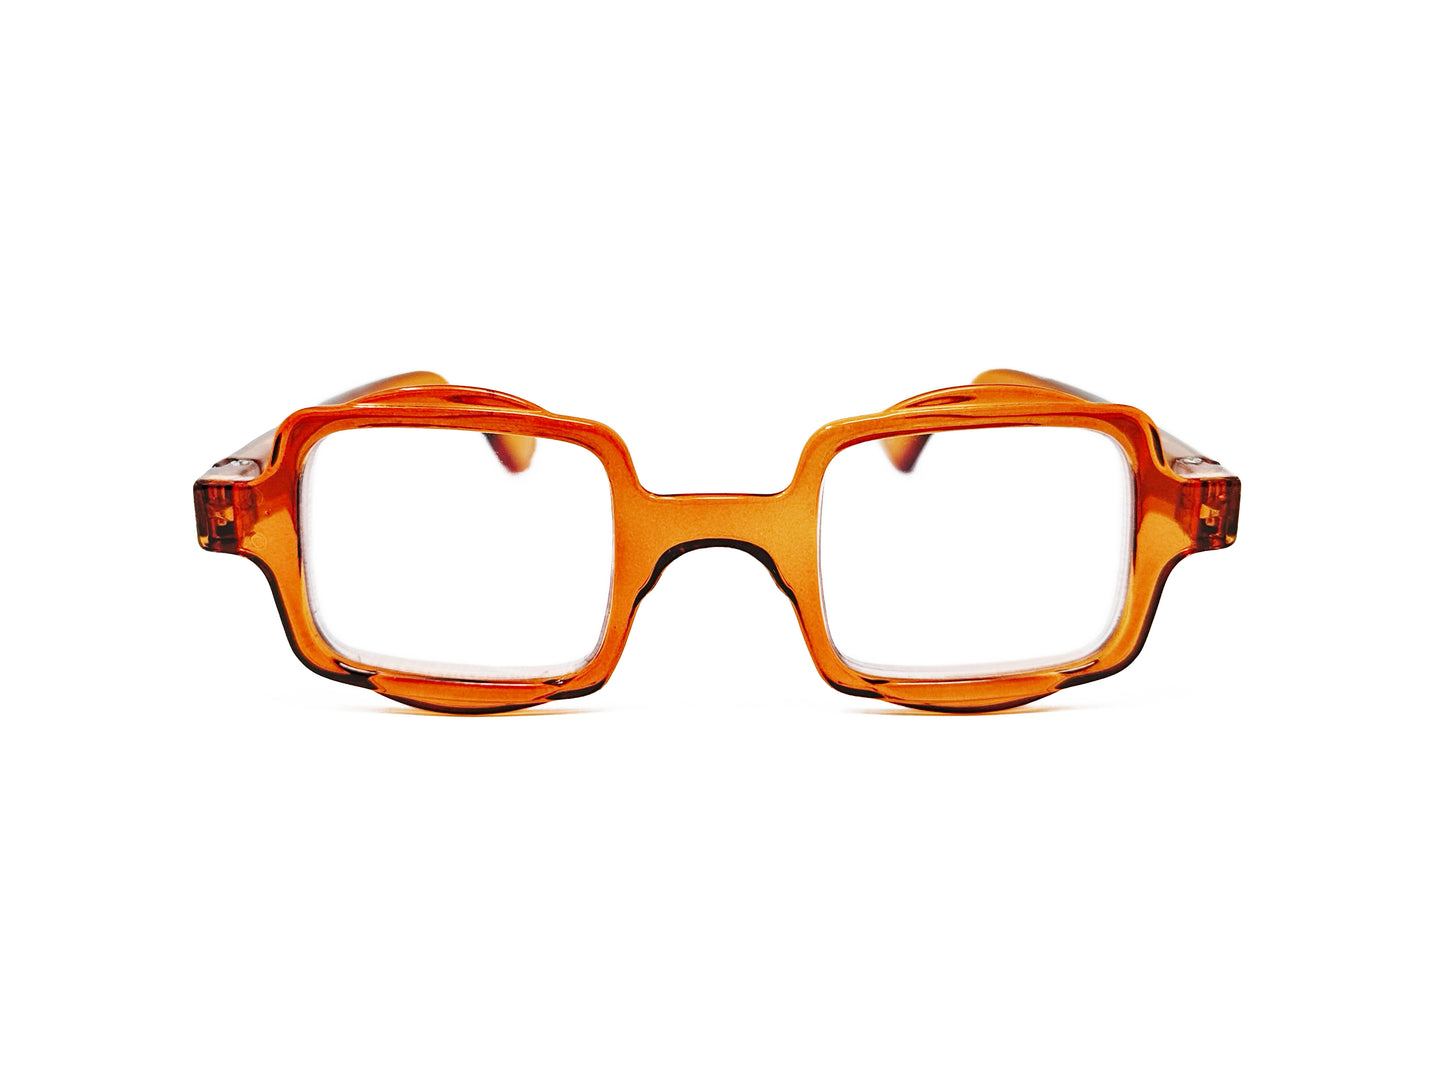 Aptica square reading glass with half-circle shape on top and bottom . Model: Hive. Color: Sticky Honey -  Honey orange, Semi-transparent. Front view.